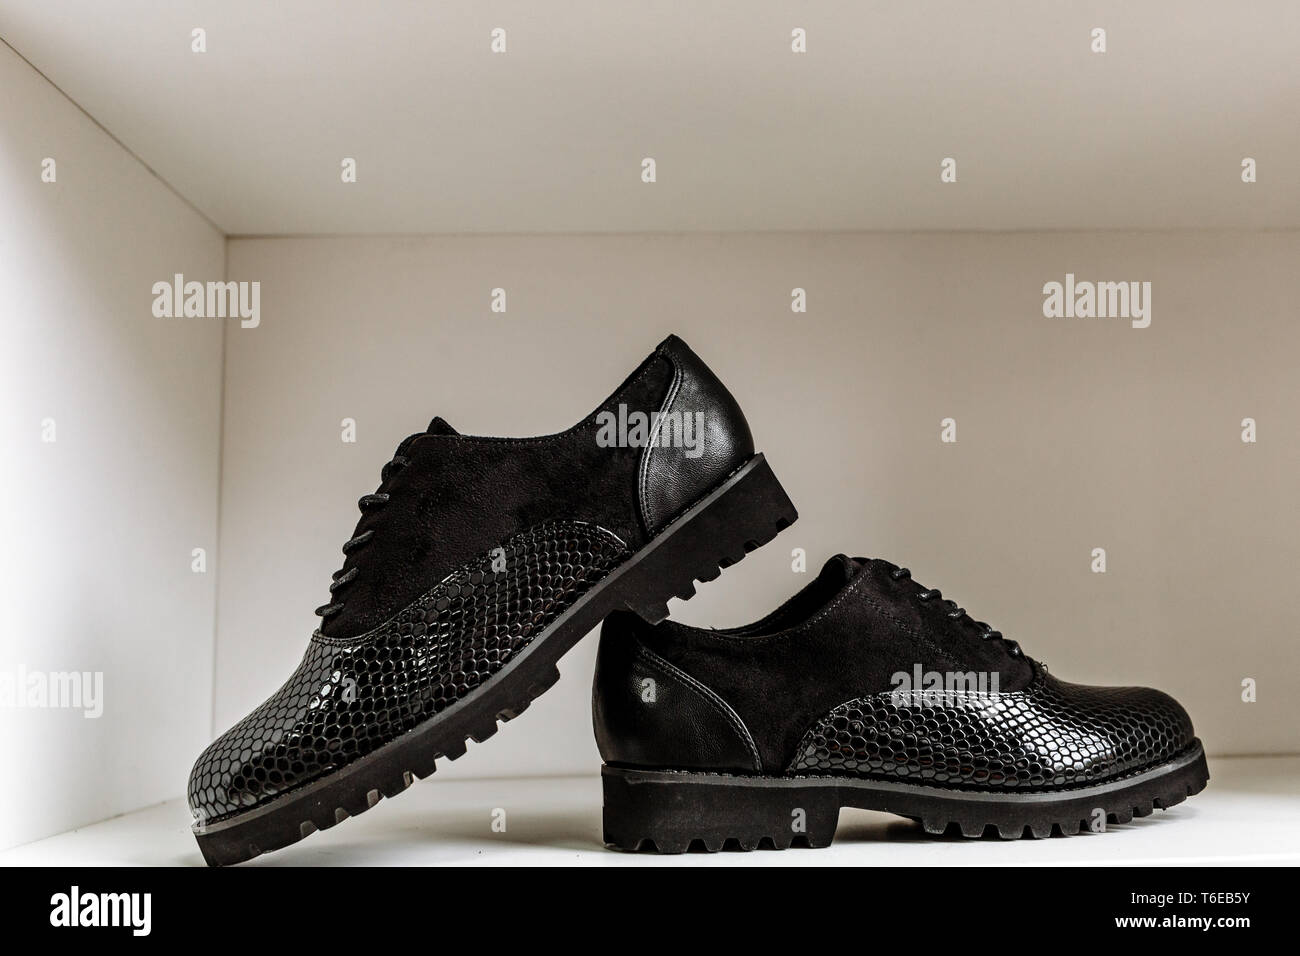 fashionable black patent leather shoes with a snake-skin pattern against a white shelf in the store Stock Photo